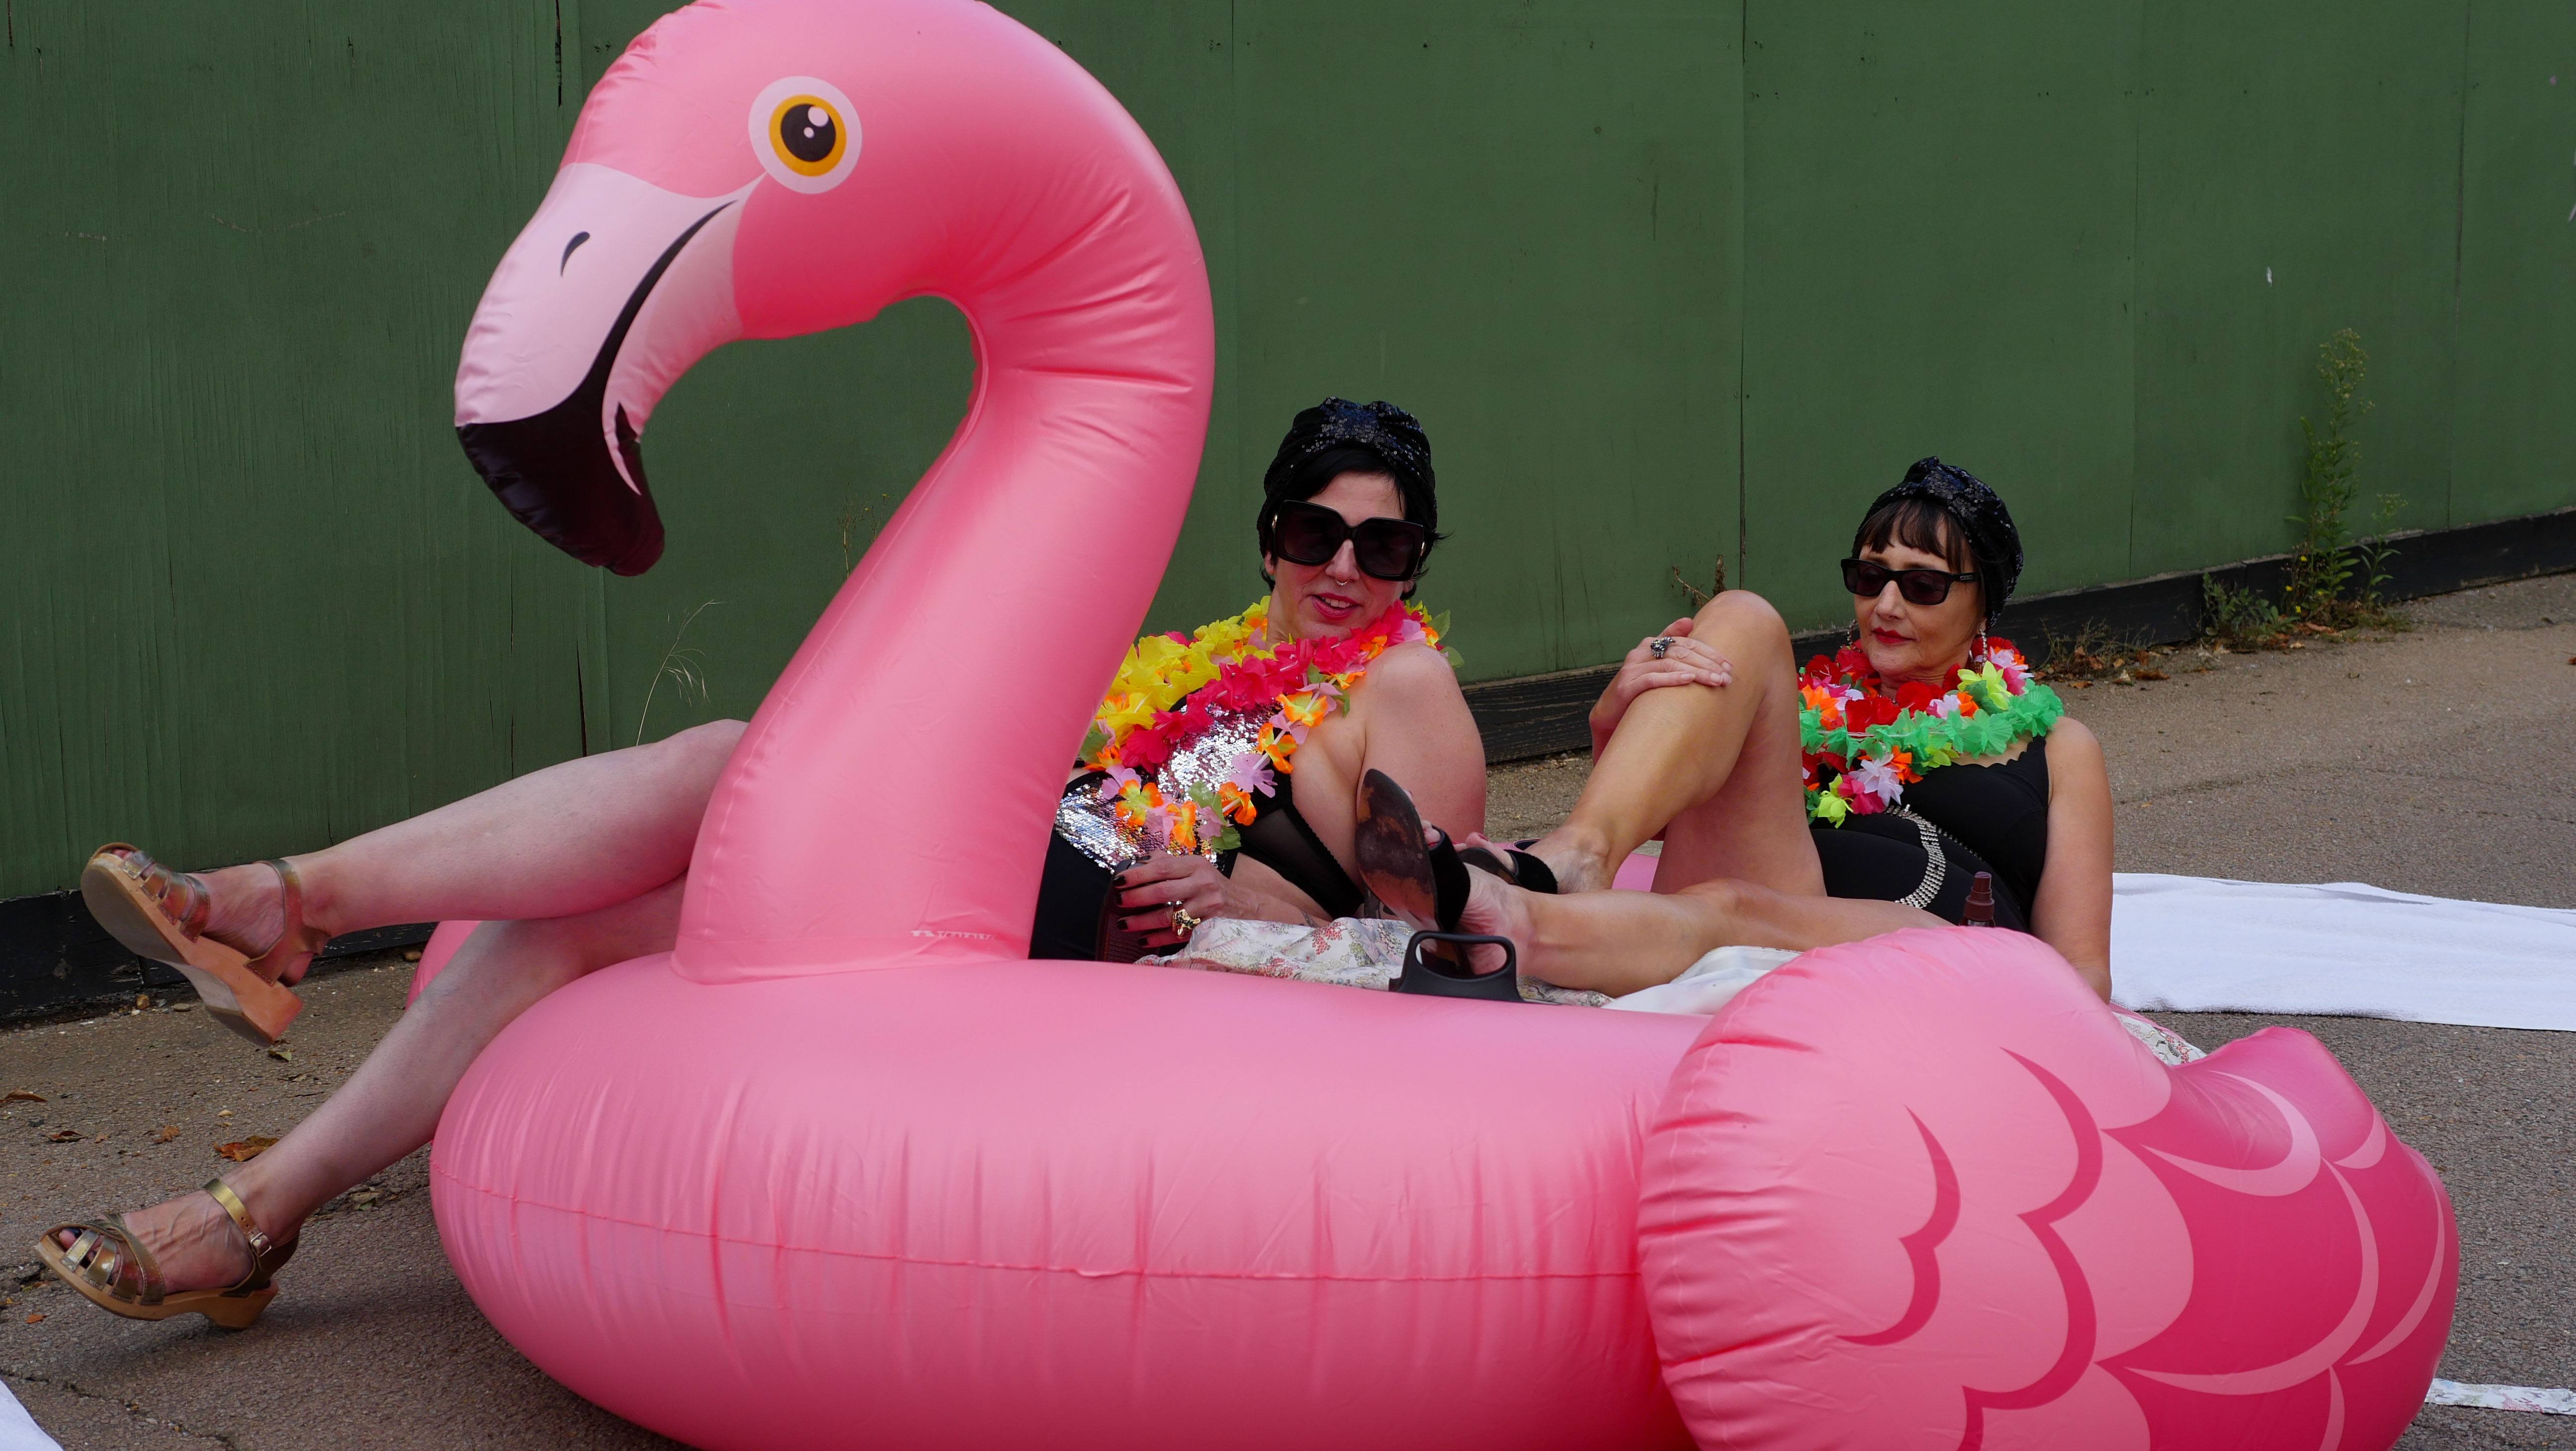 two women in lingerie recline leisurely in a blow up pini flamingo on a pavement